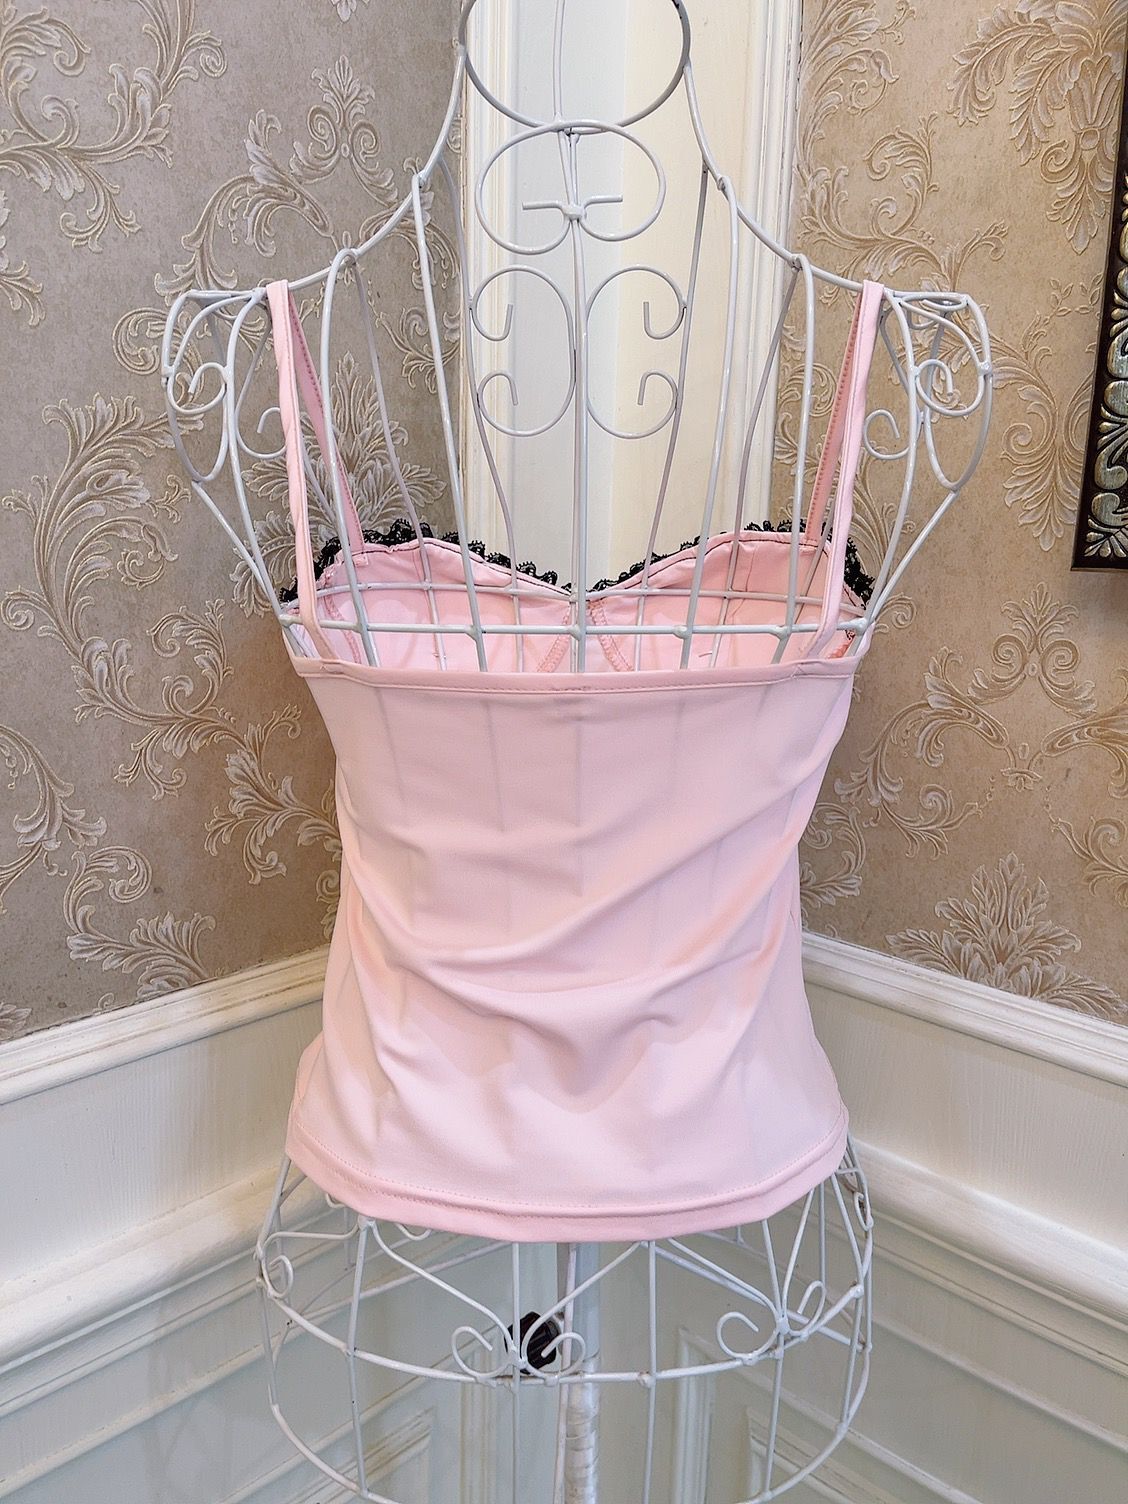 Sweetheart Princess Balletcore Pink Bow Slim Fit Camisole Top